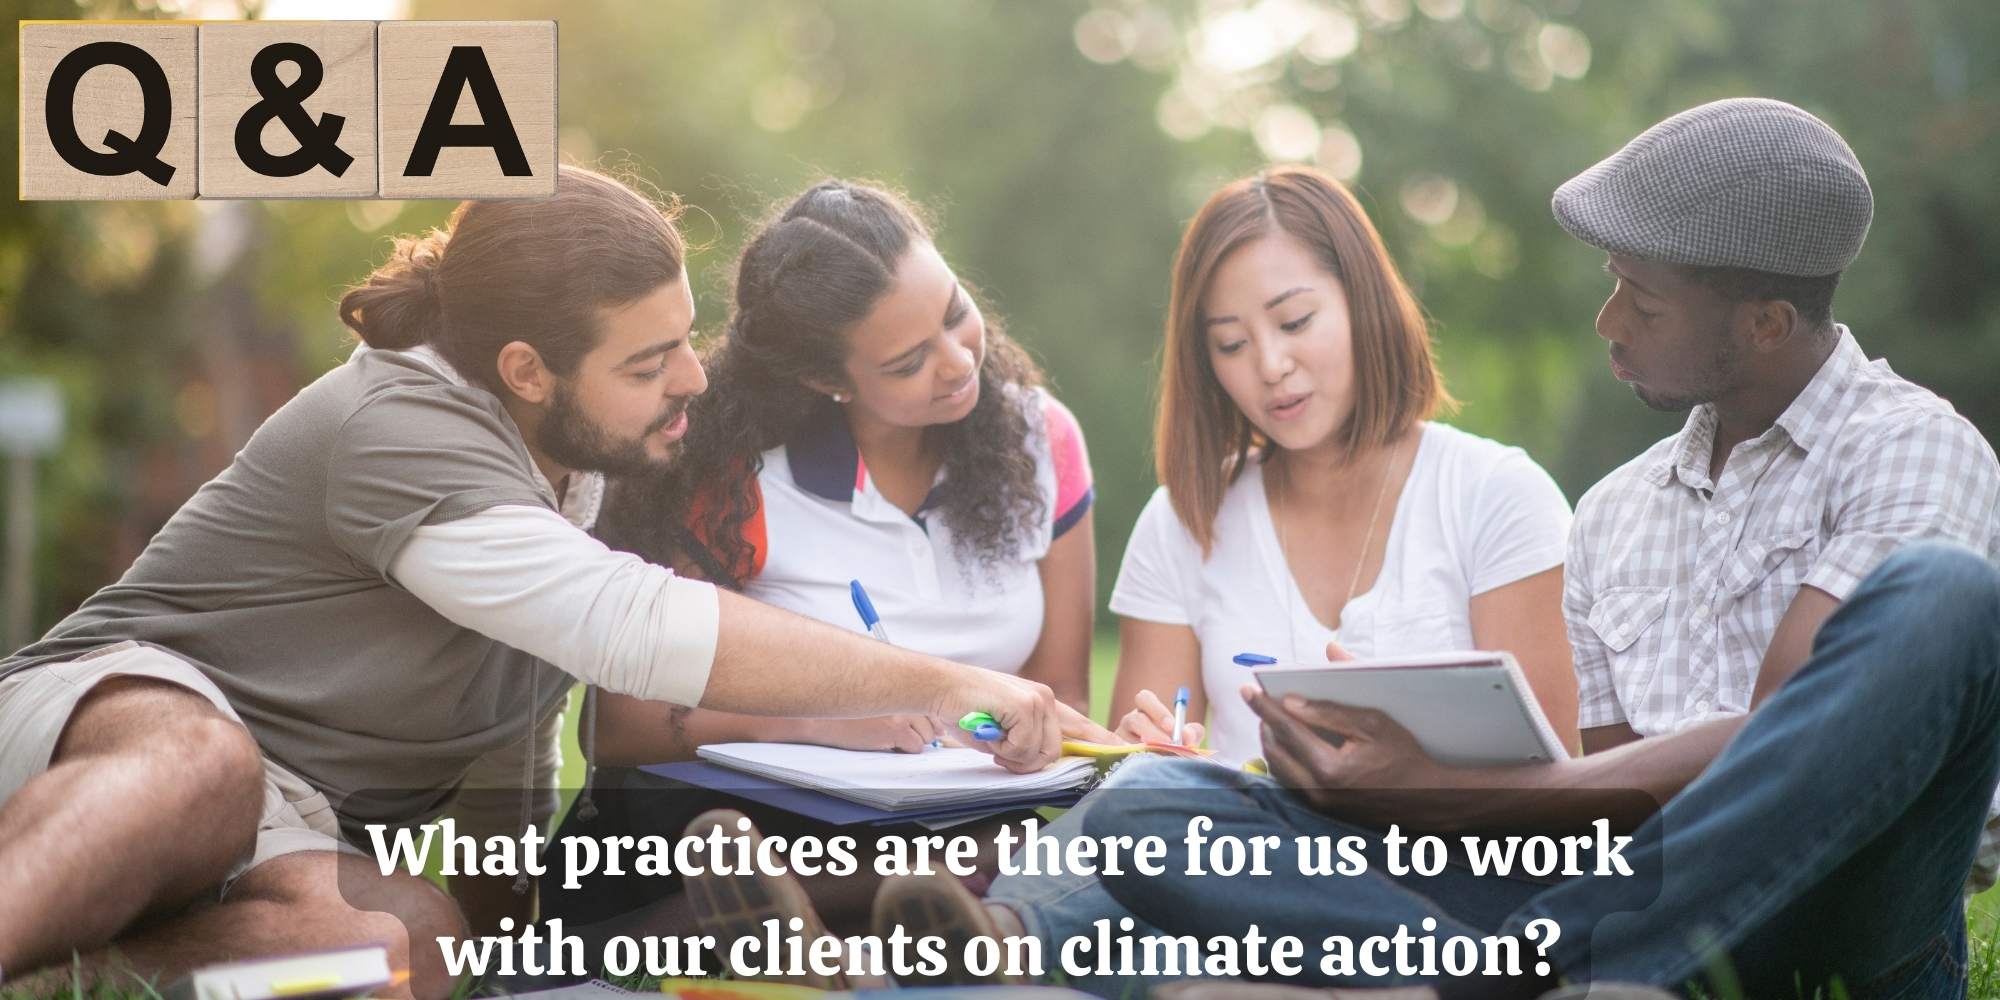 Q&A : What practices are there for us to work with our clients on climate action?